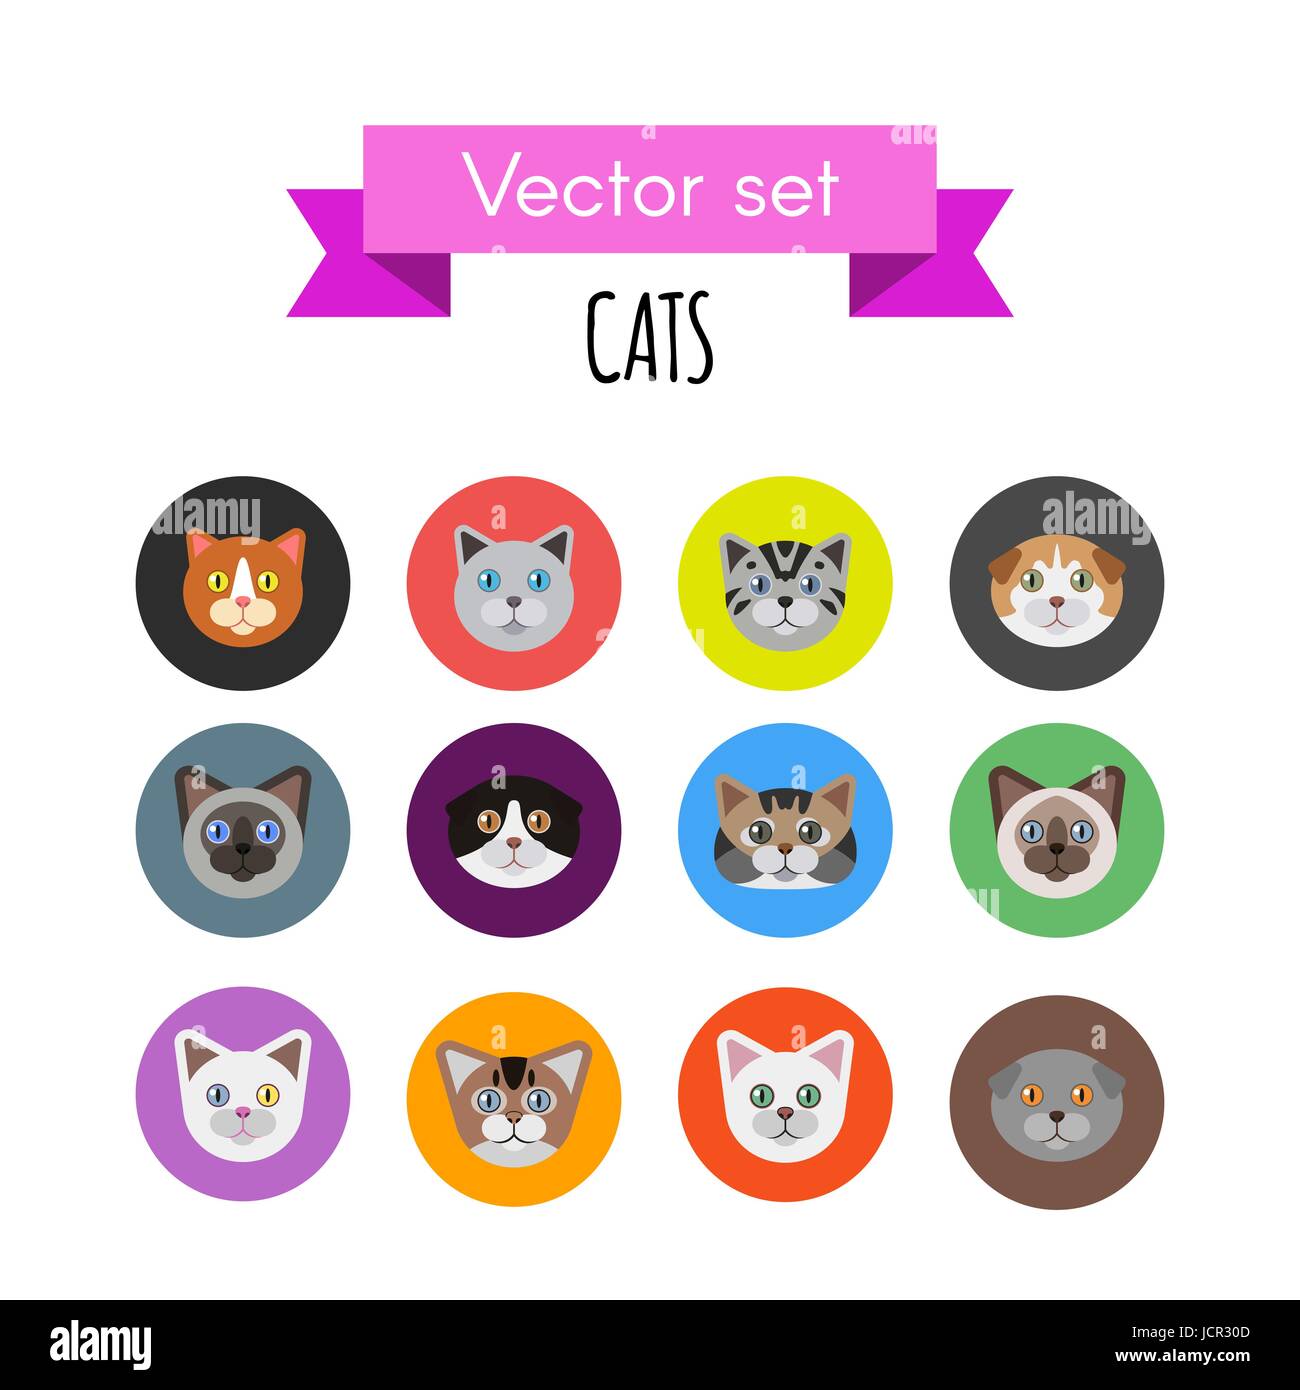 Set of cat icons Stock Vector